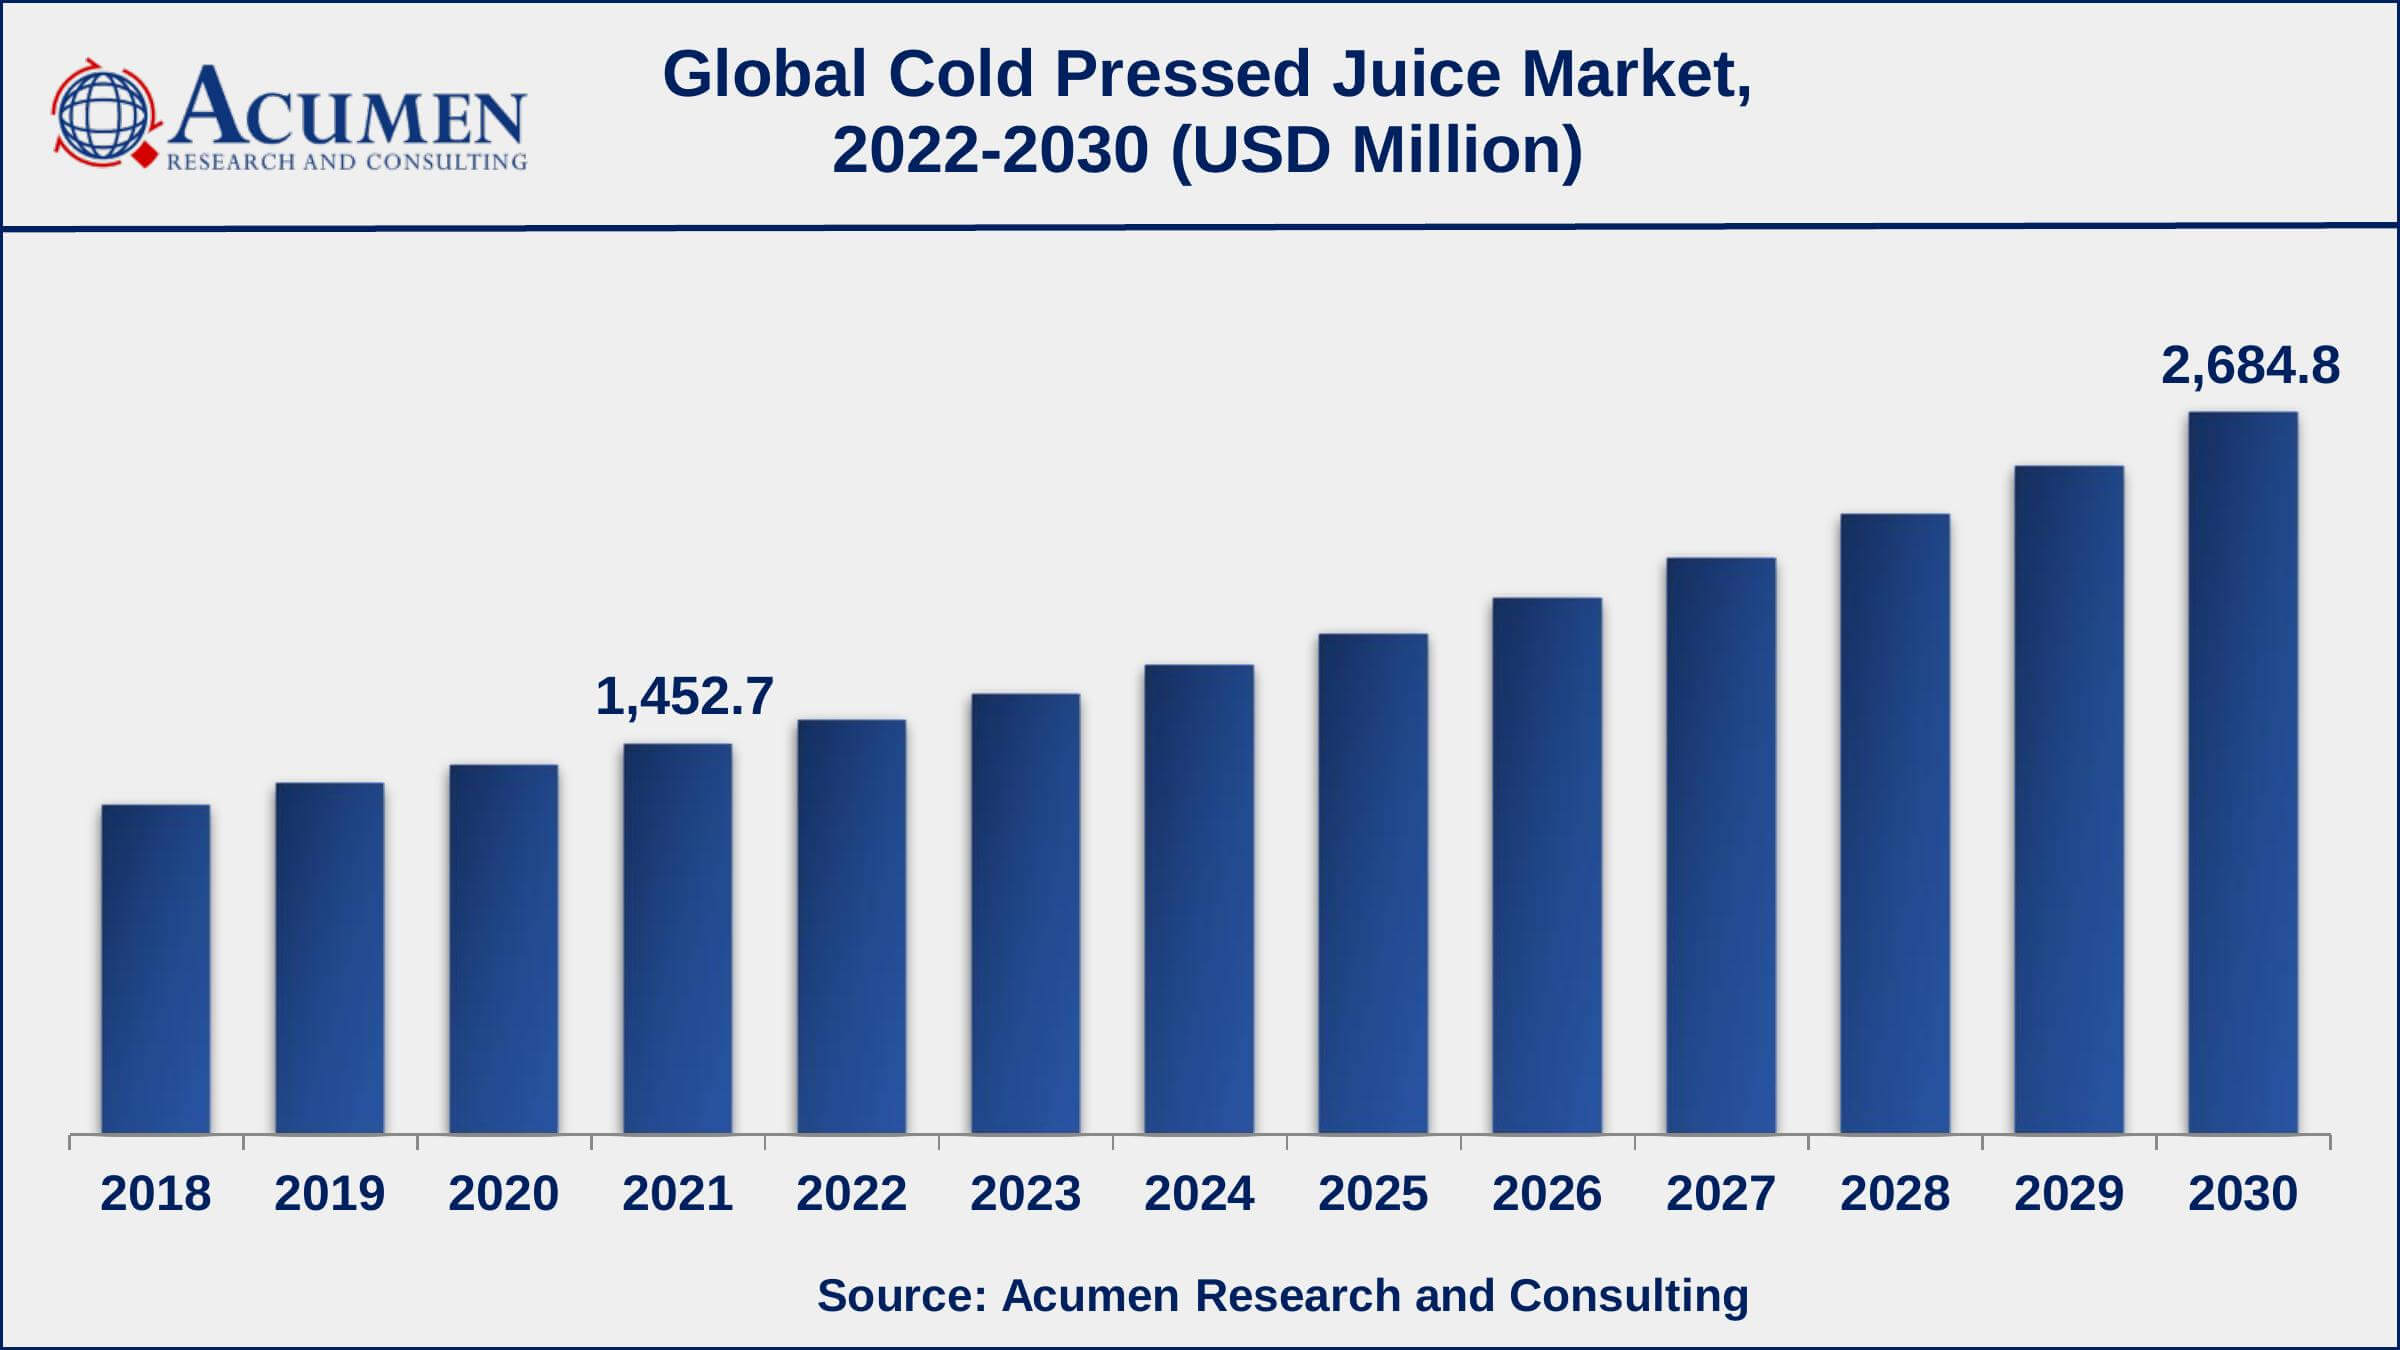 Asia-Pacific cold pressed juice market growth will record a CAGR of more than 7.5% from 2022 to 2030